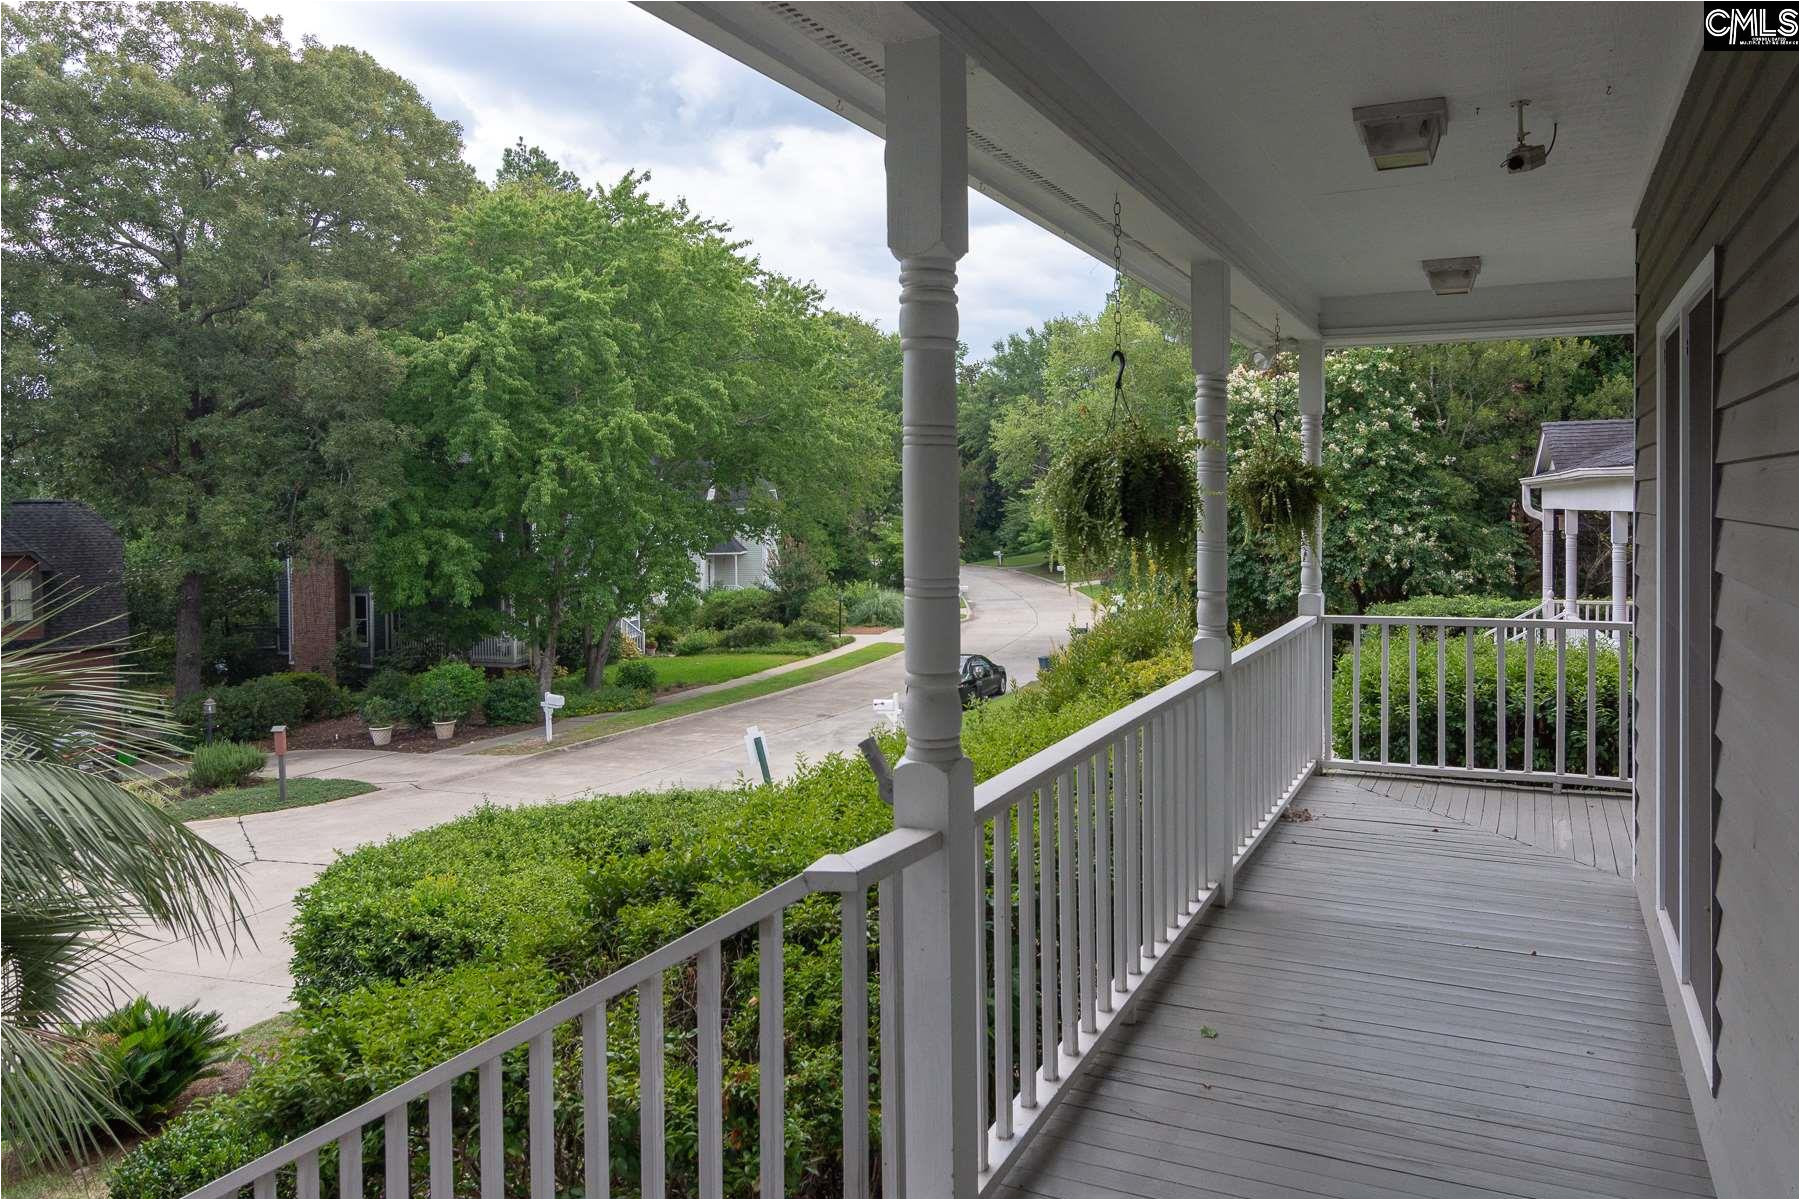 property image of 106 branch hill lane in columbia sc